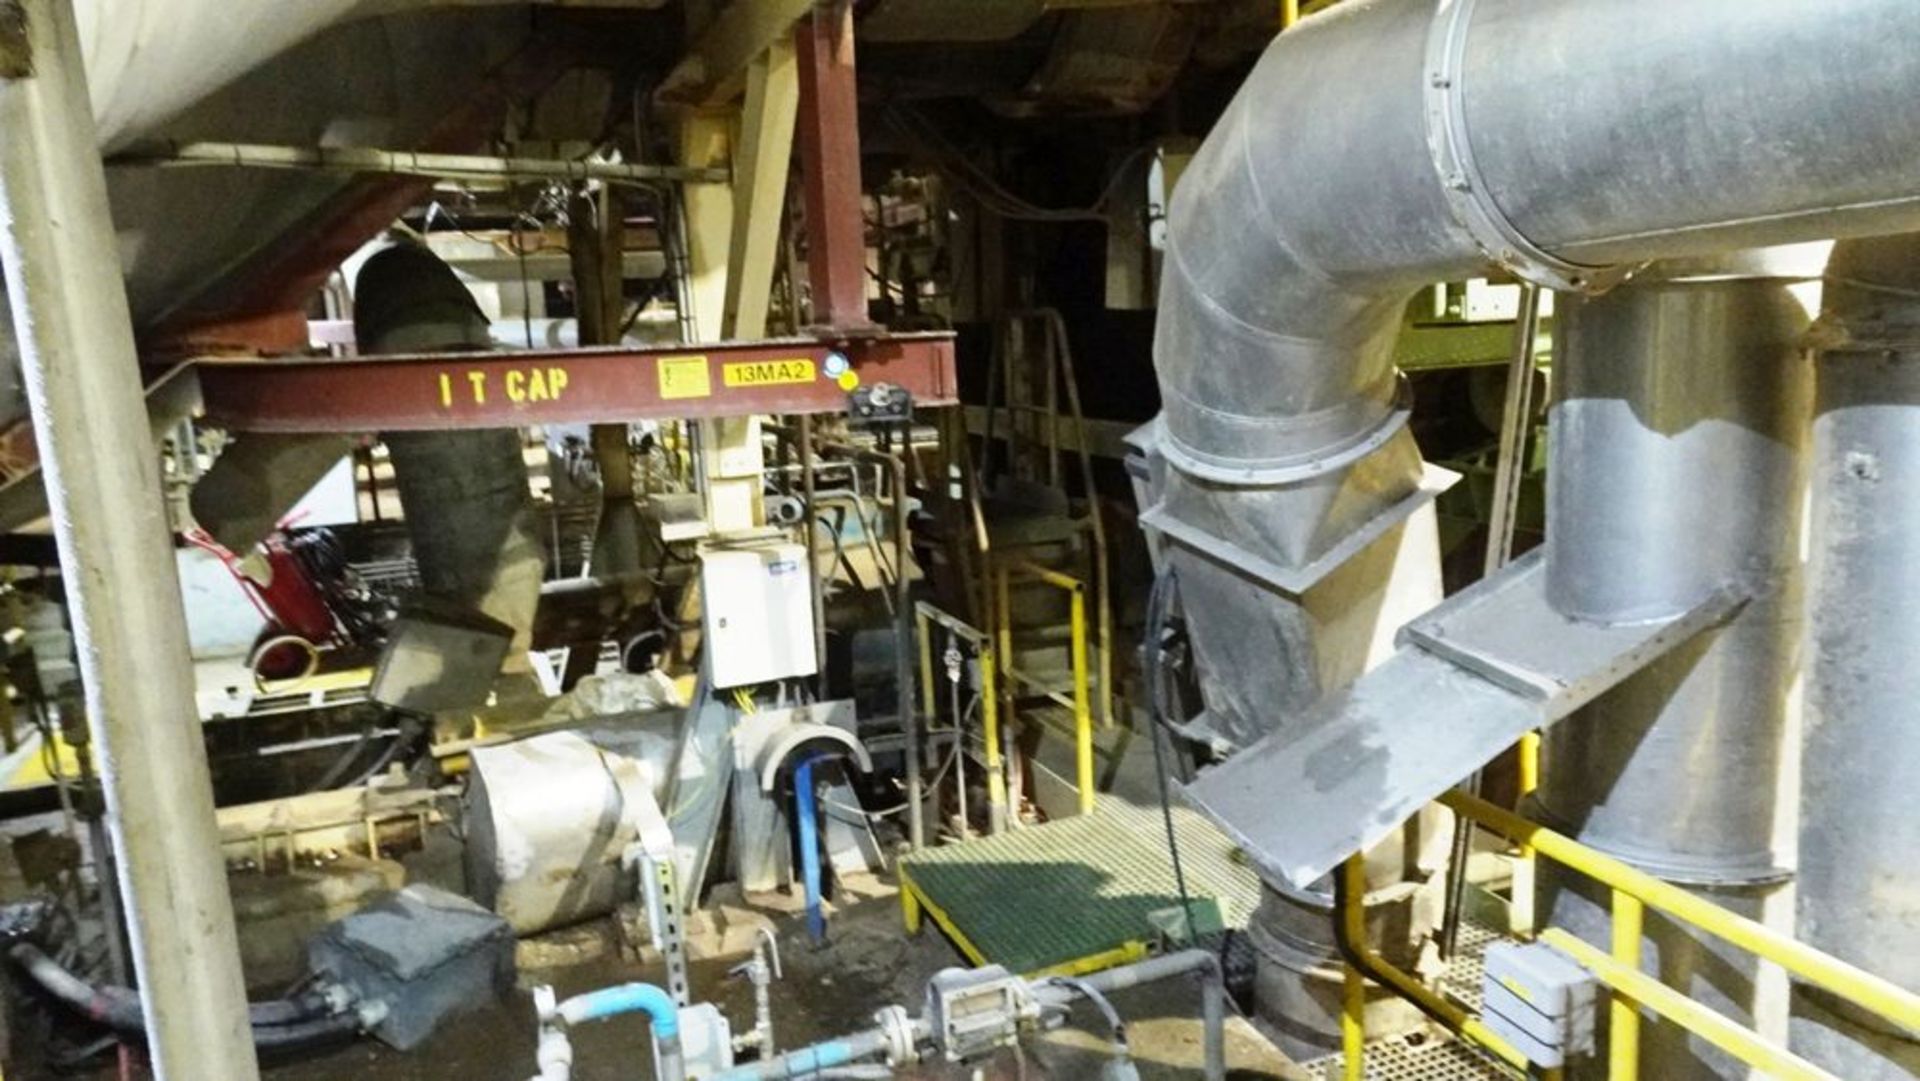 VOITH 104" TRIM YANKEE TISSUE MILL - NOTE: TO BE SOLD BY PRIVATE TREATY, CONTACT AUCTIONEER DIRECT - Image 101 of 273